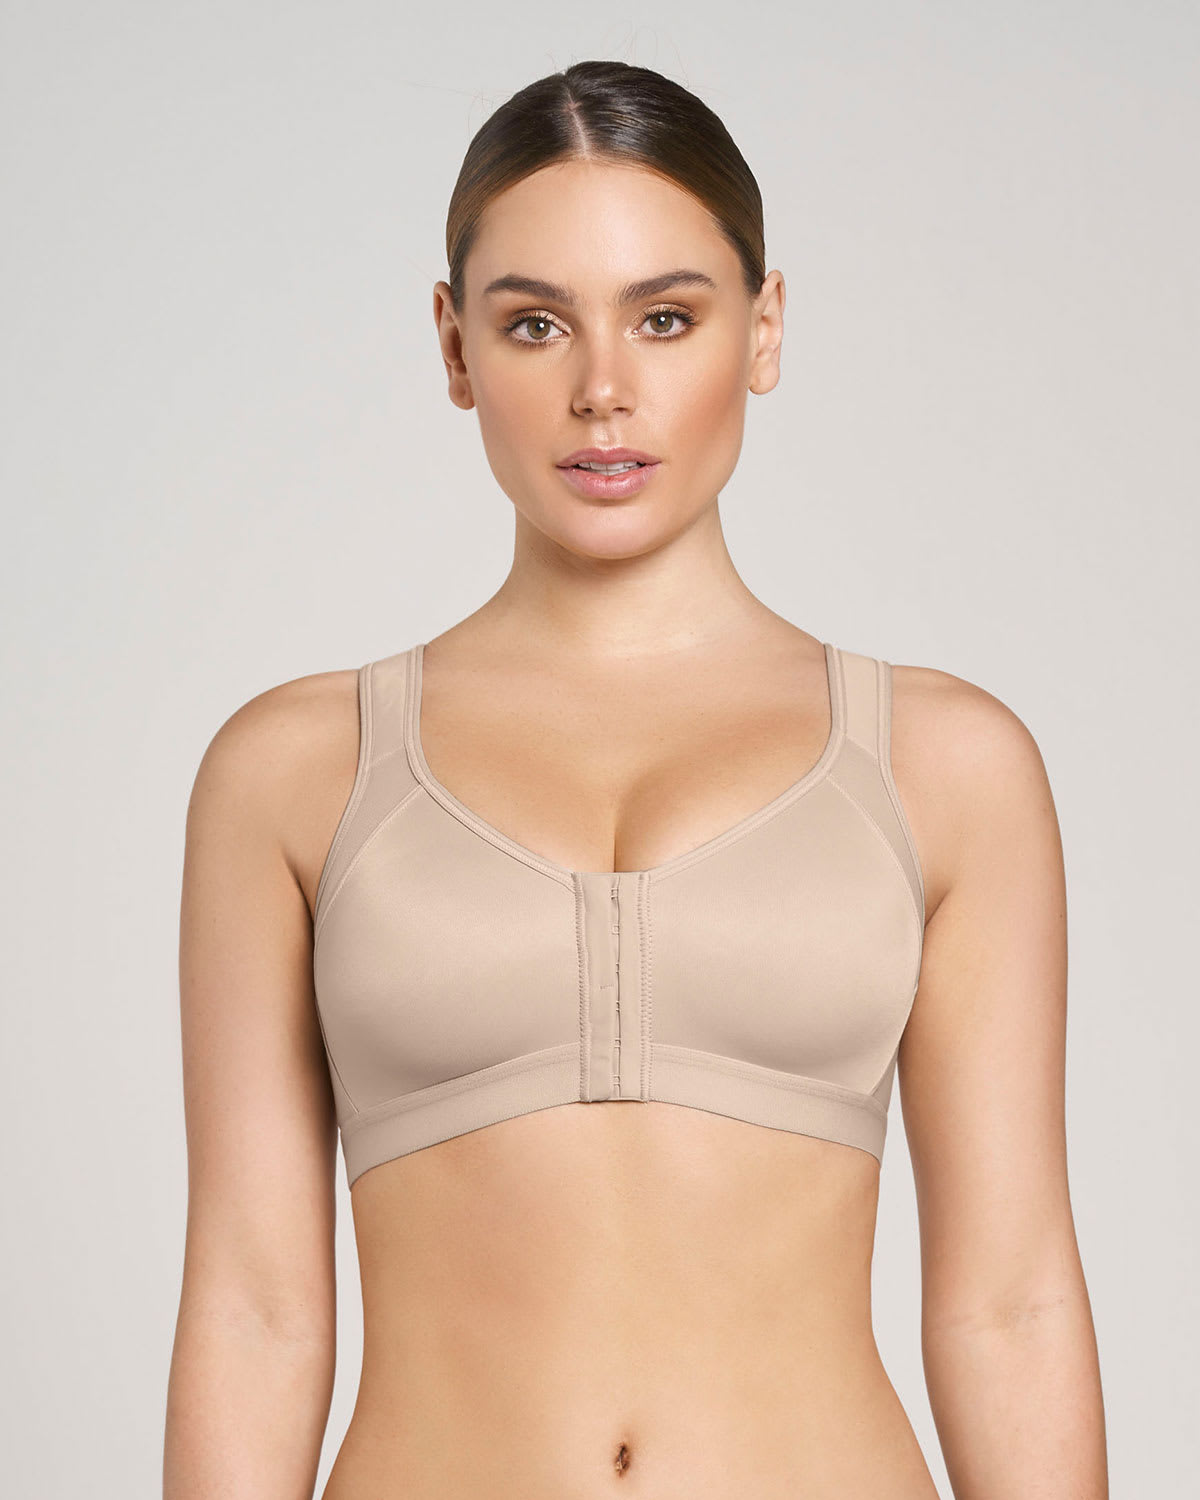 A Guide to Post Surgical Bras - Mastectomy Shop